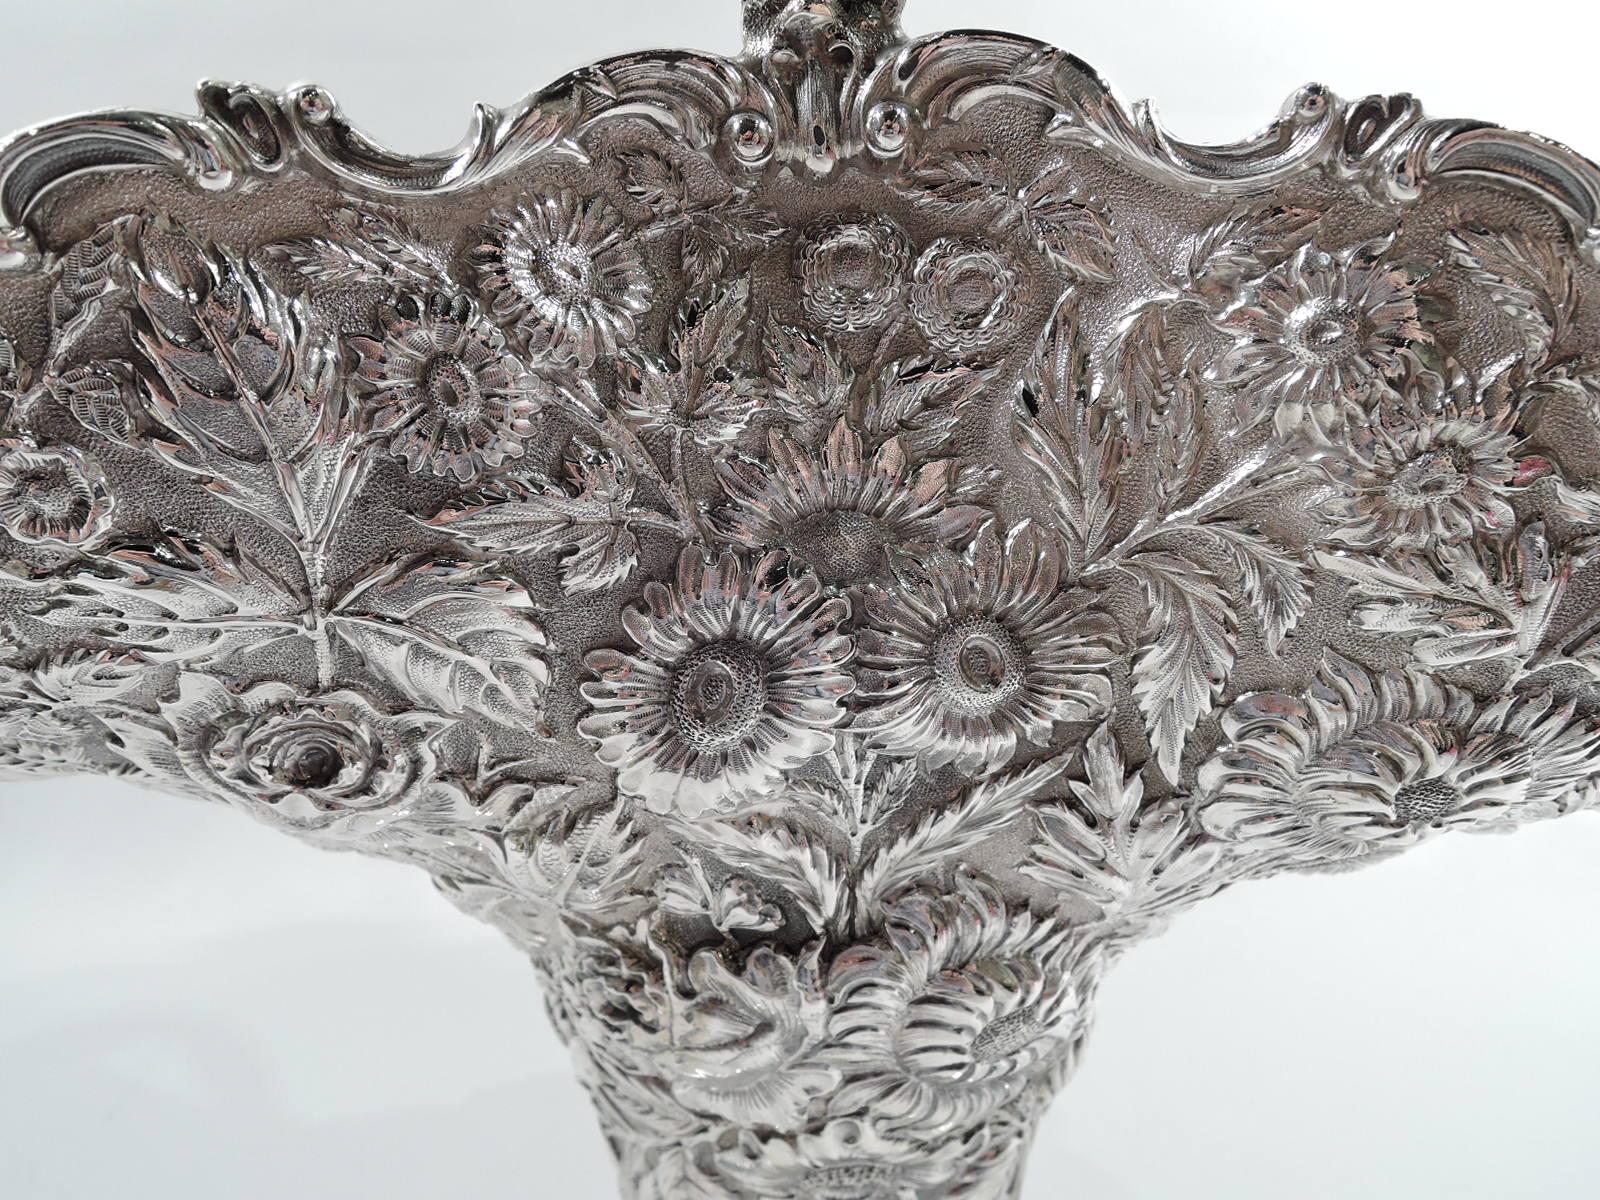 Antique Baltimore Repousse Sterling Silver Flower Basket by Stieff 2